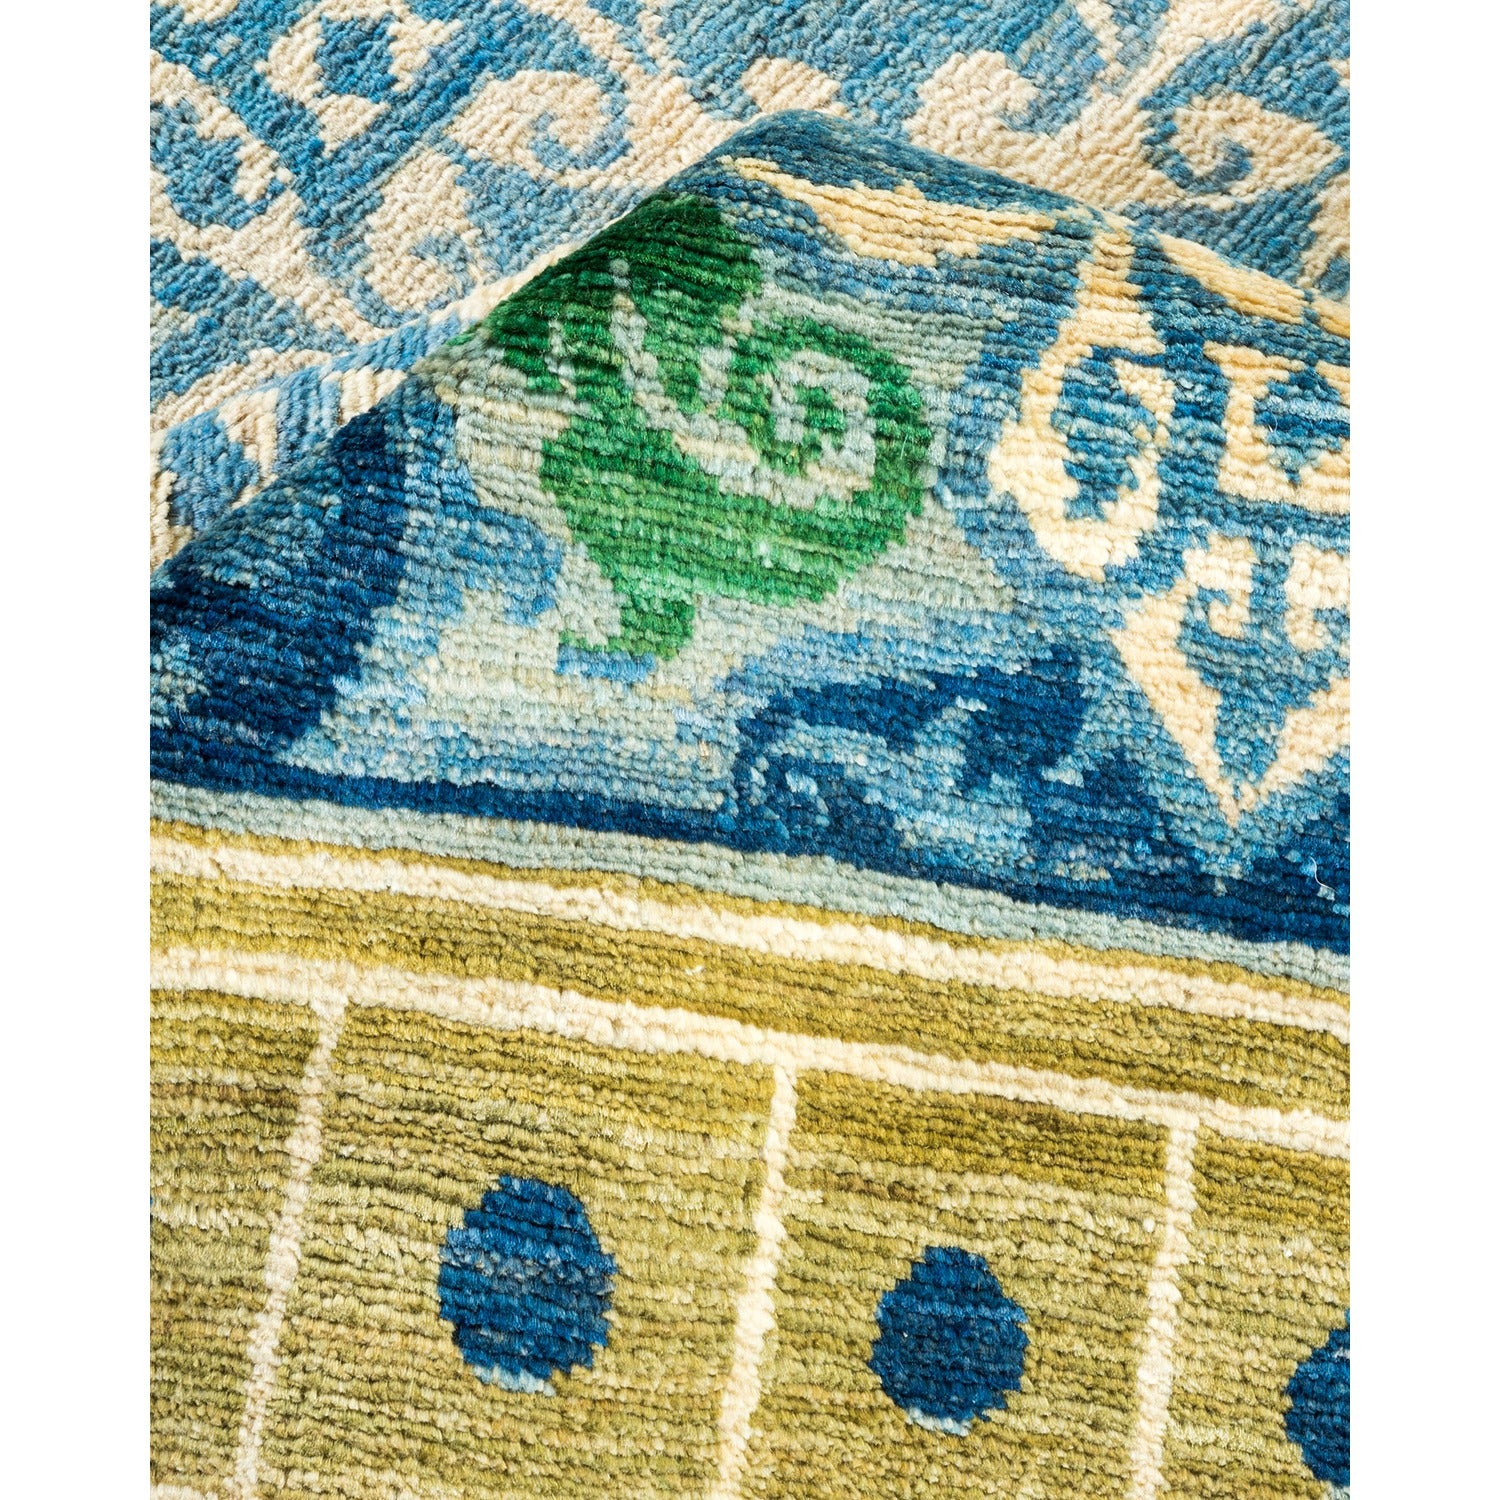 Colorful rug with intricate patterns, inspired by traditional textile arts.